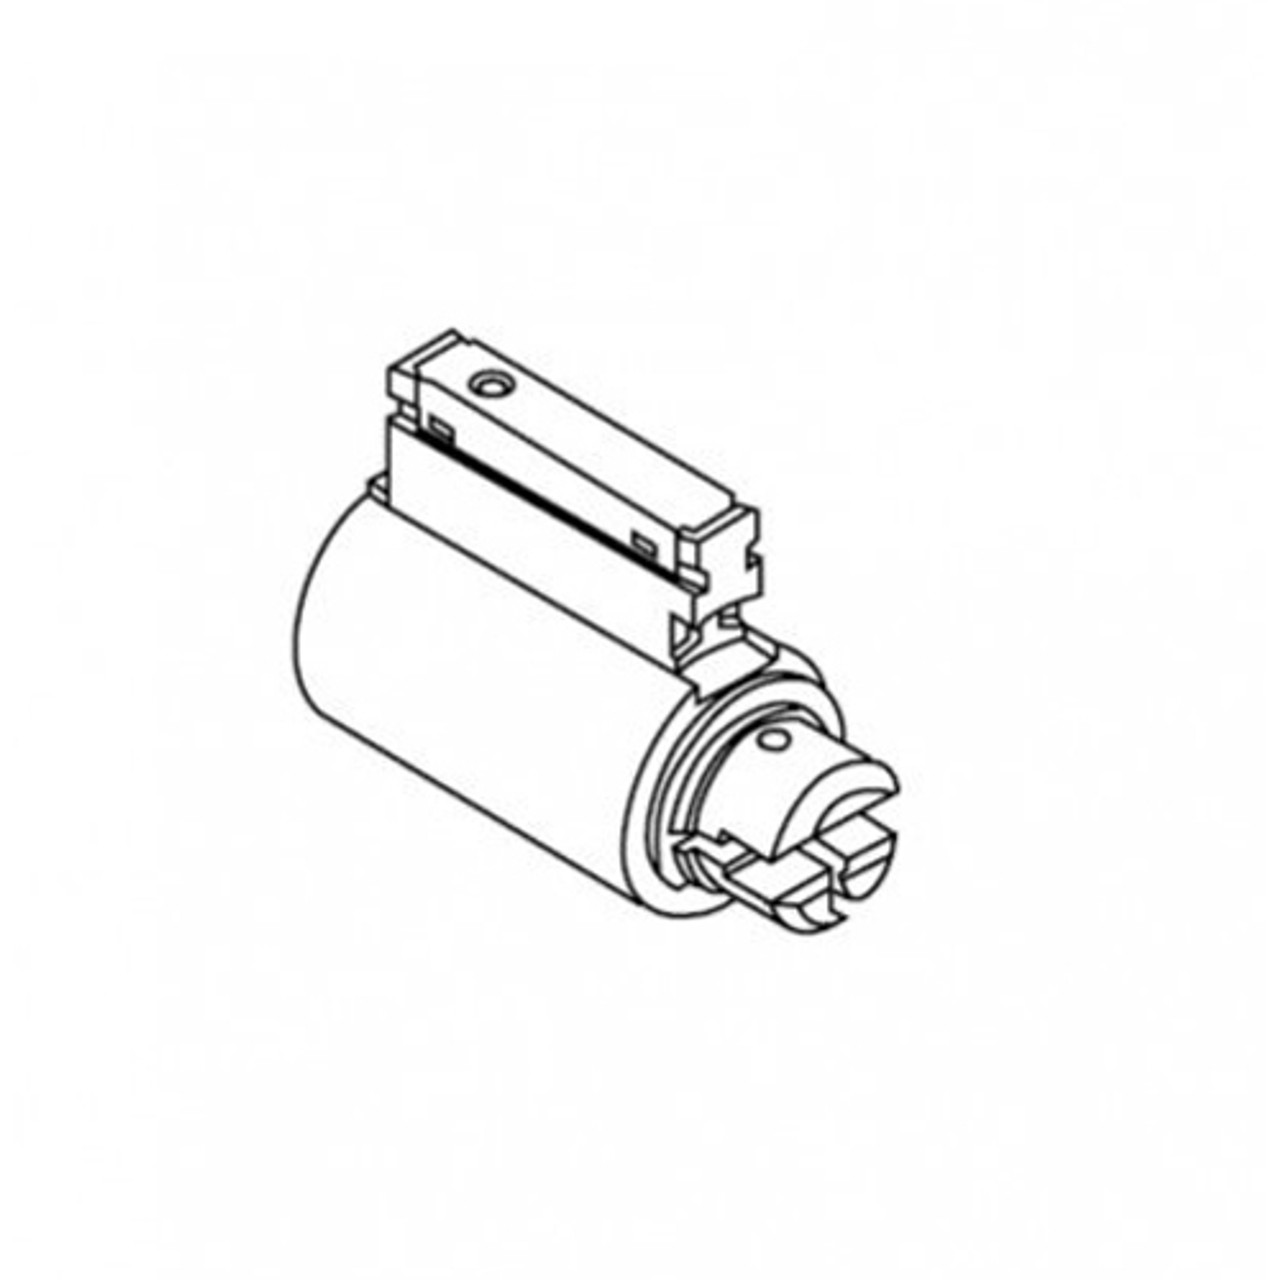 CR2000-052-N2-626 Corbin Russwin Conventional Key in Lever Cylinder in Satin Chrome Finish